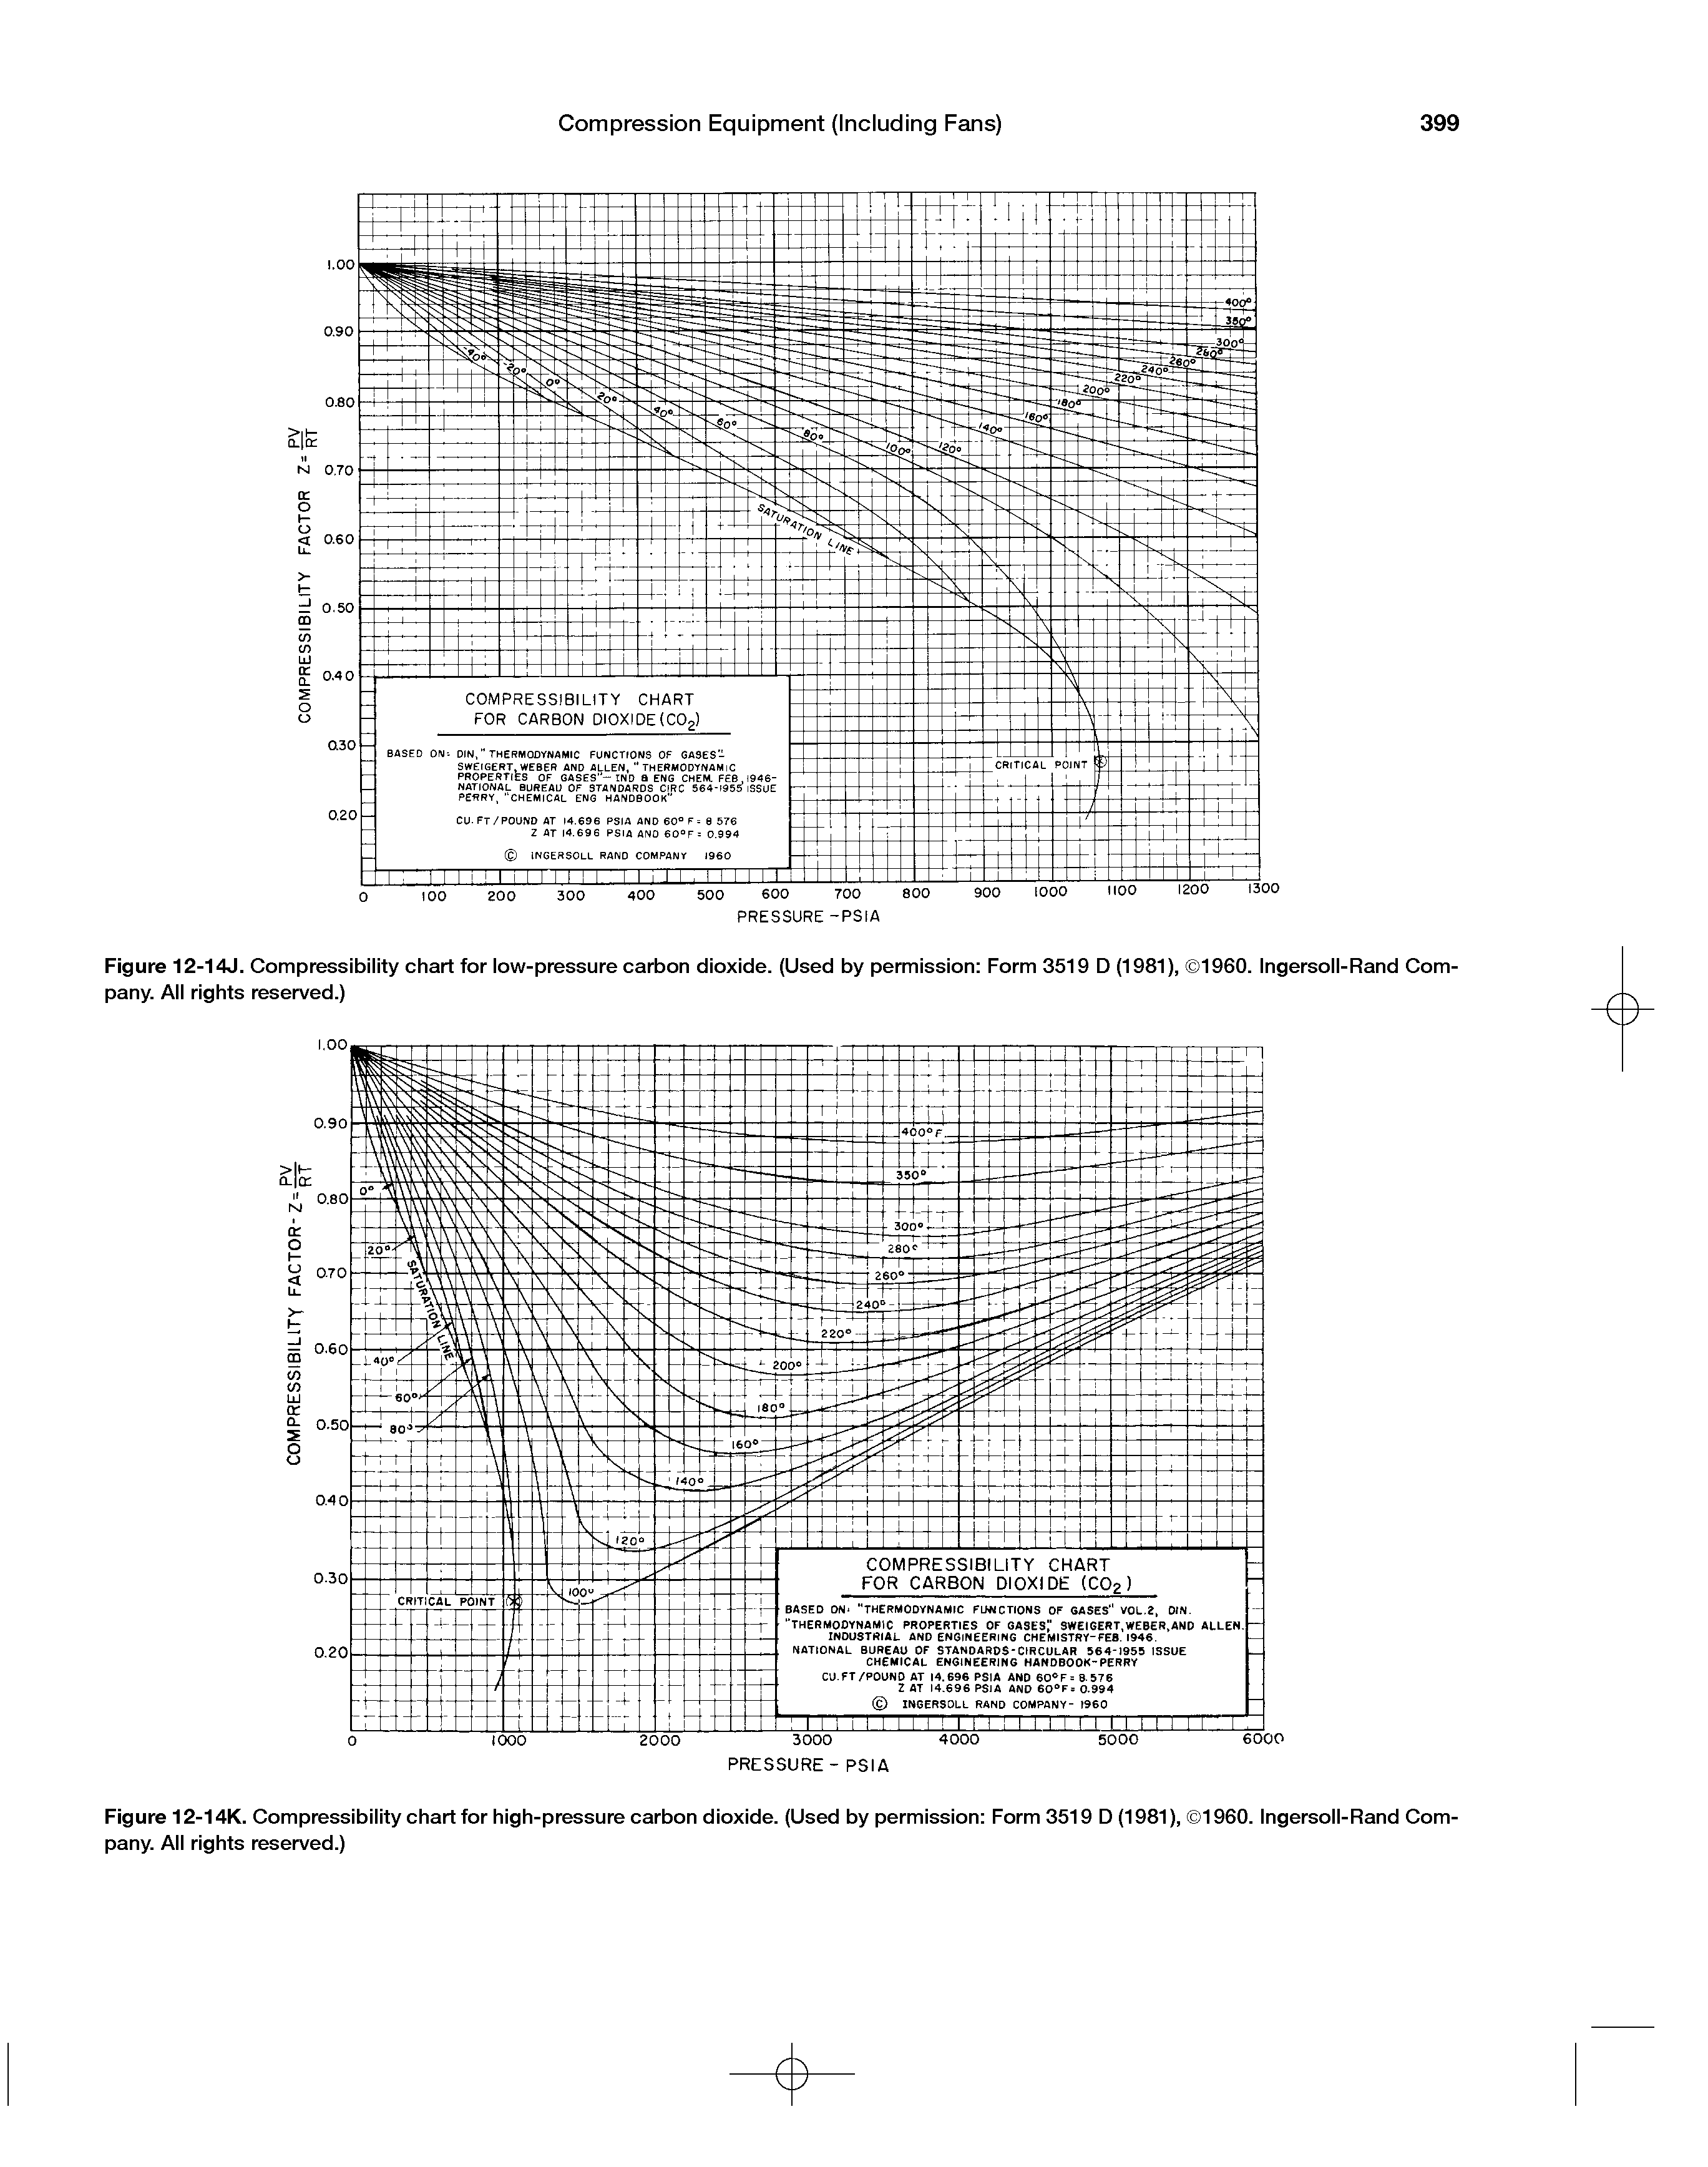 Figure 12-14J. Compressibility chart for low-pressure carbon dioxide. (Used by permission Form 3519 D (1981), 1960. Ingersoll-Rand Company. All rights reserved.)...